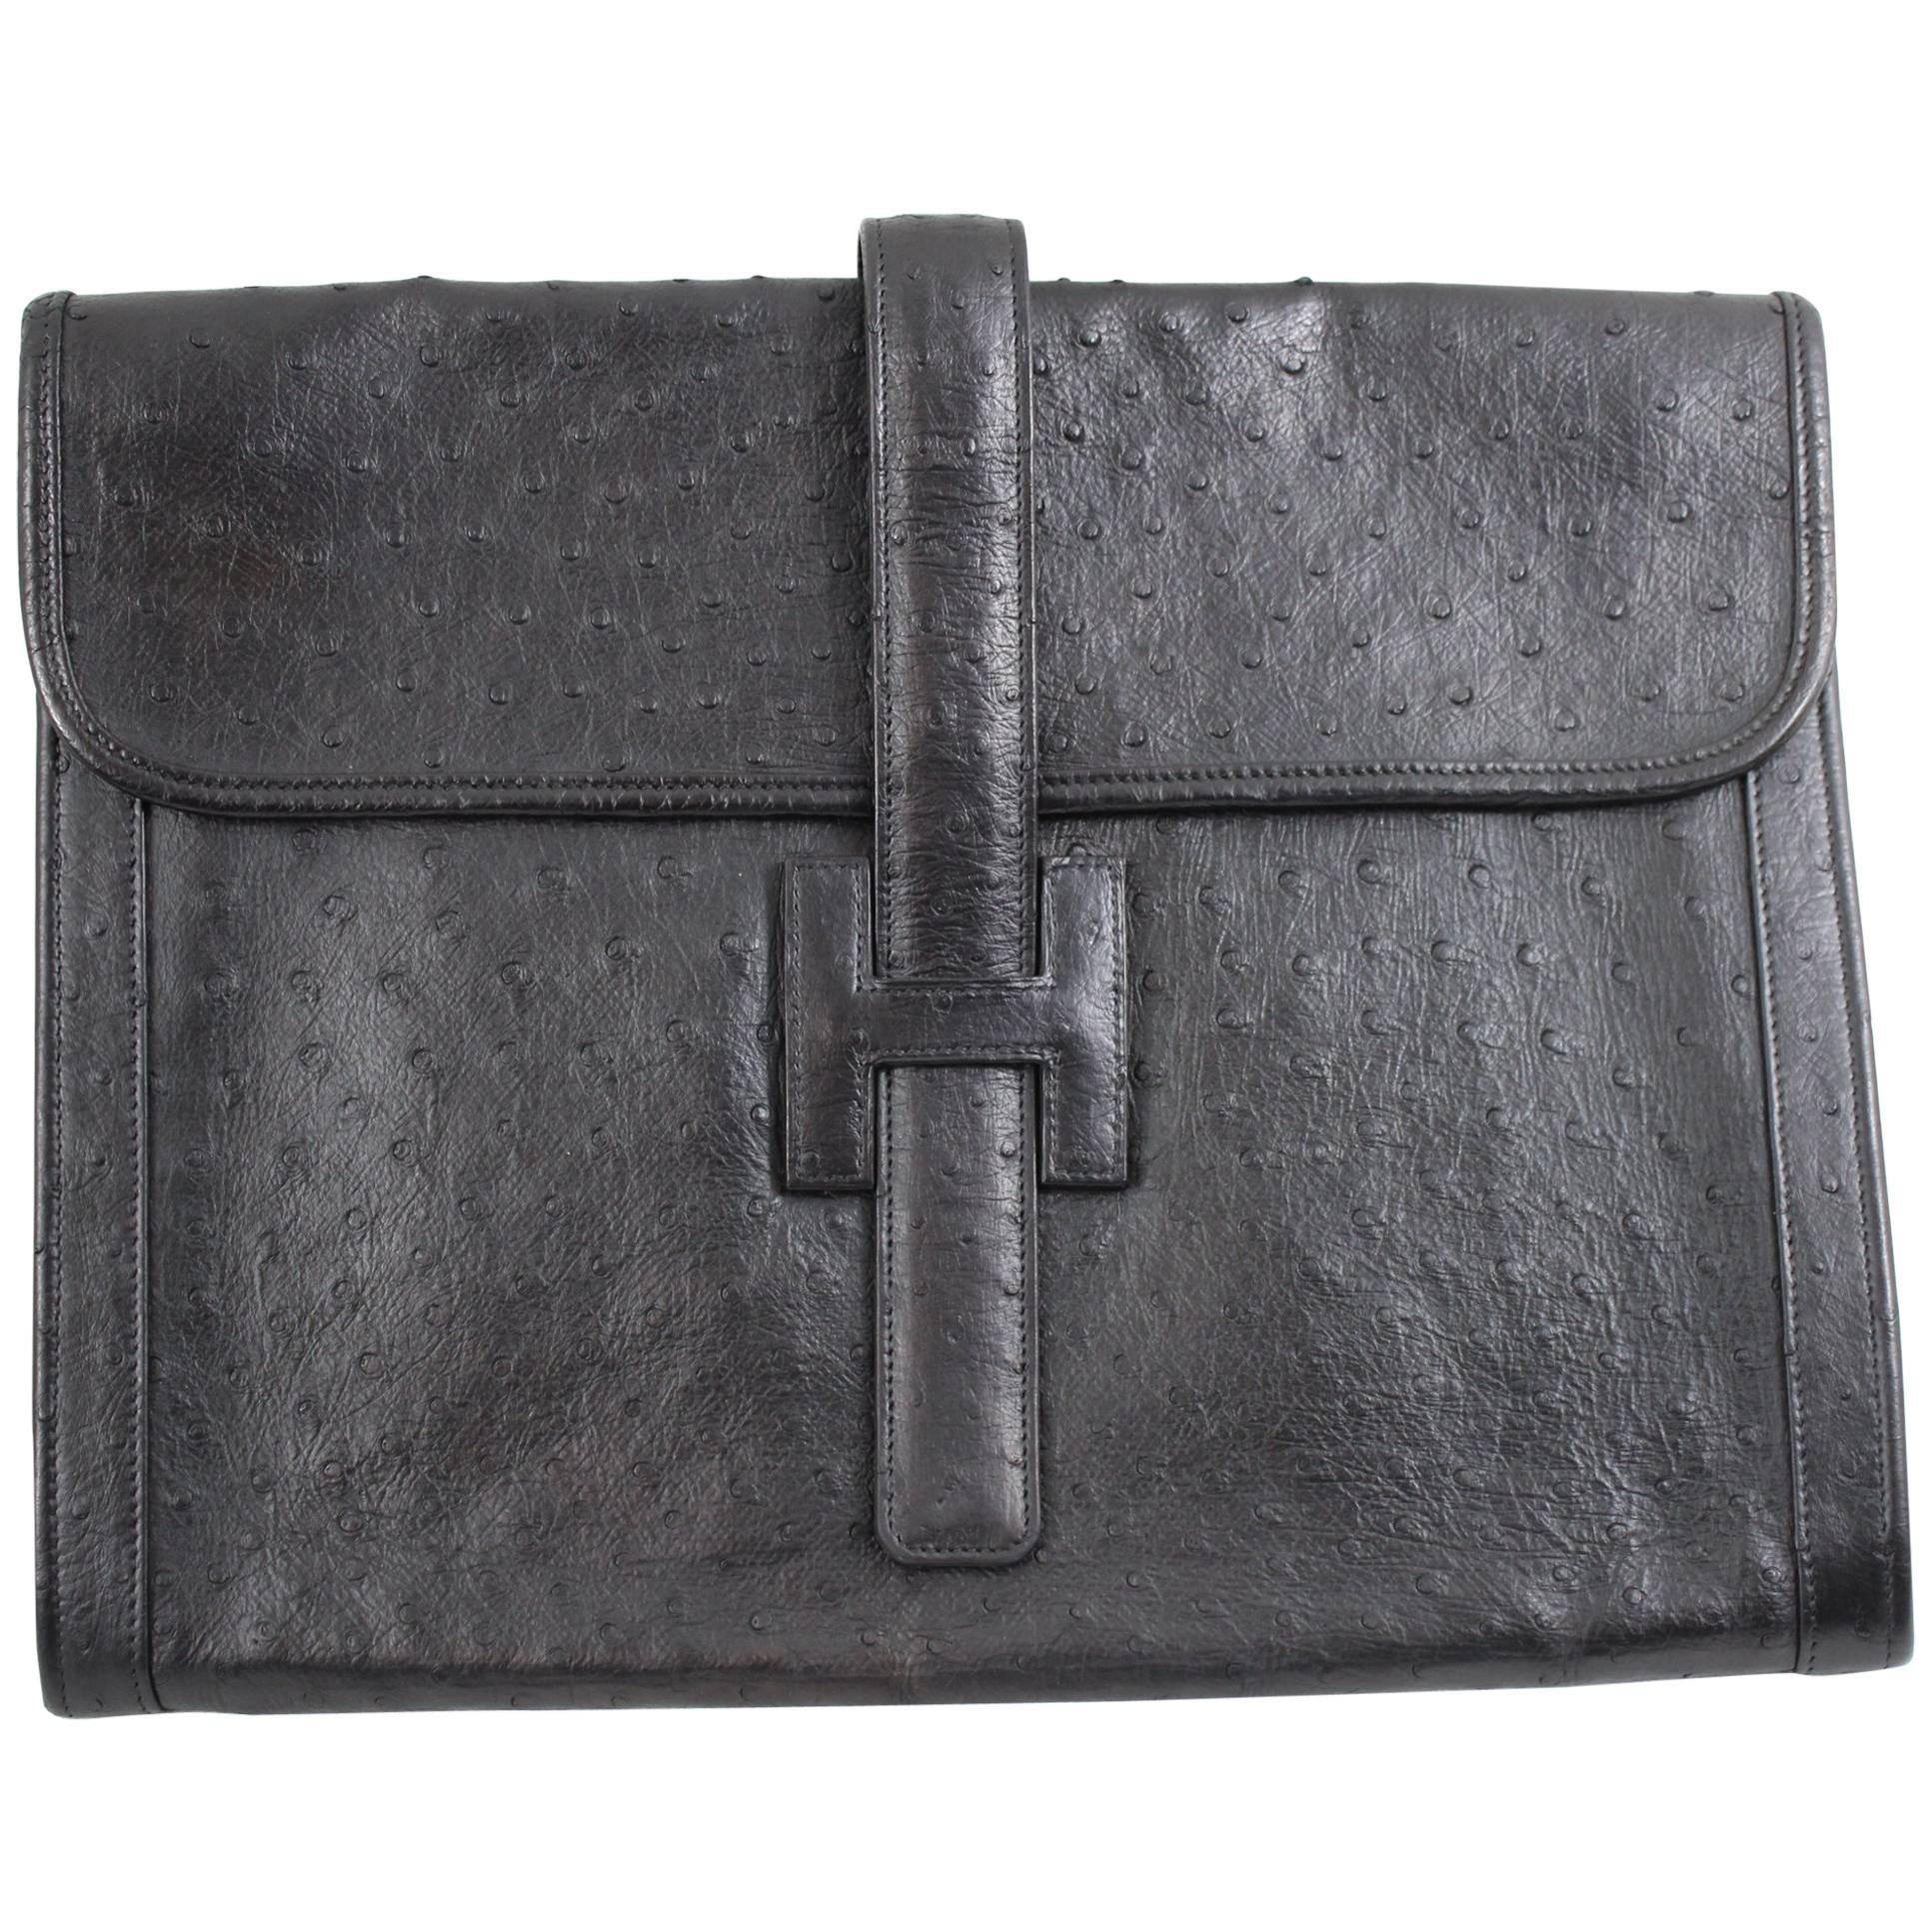 Awesome Vintage Hermes Jige GMClutch in Ostrich Leather